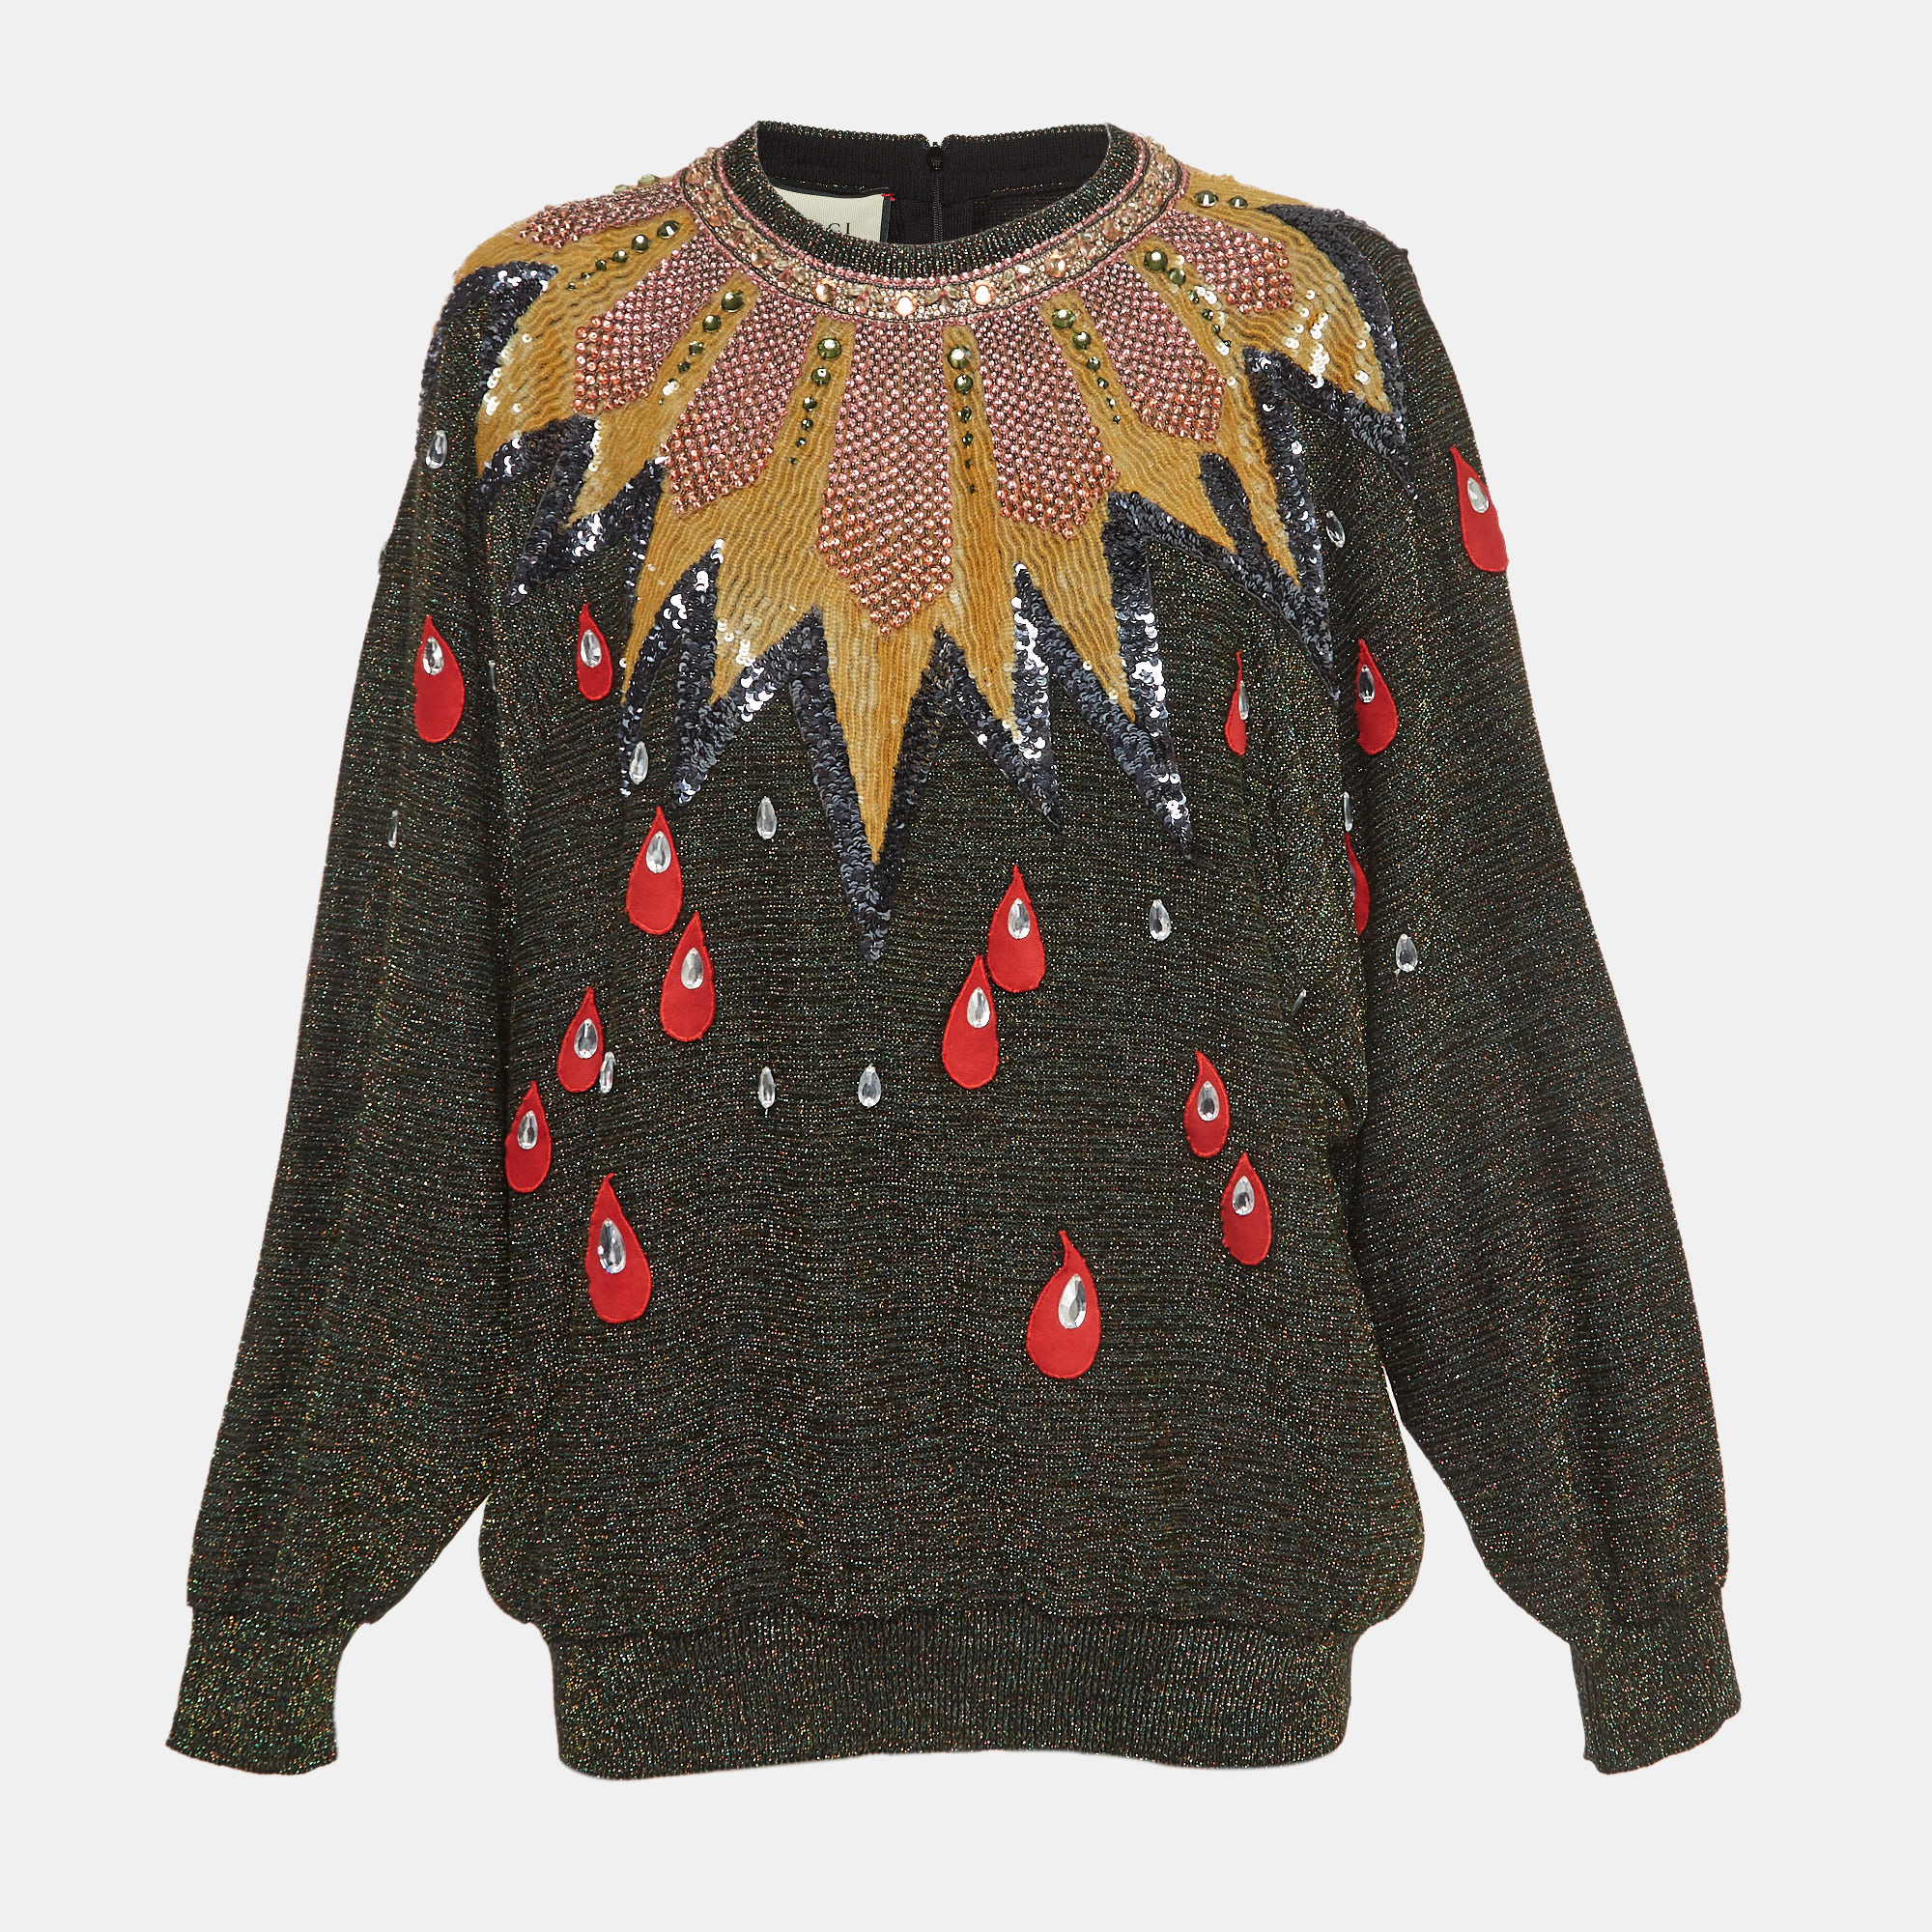 Gucci Multicolor Lurex Knit Embellished Sweater XL